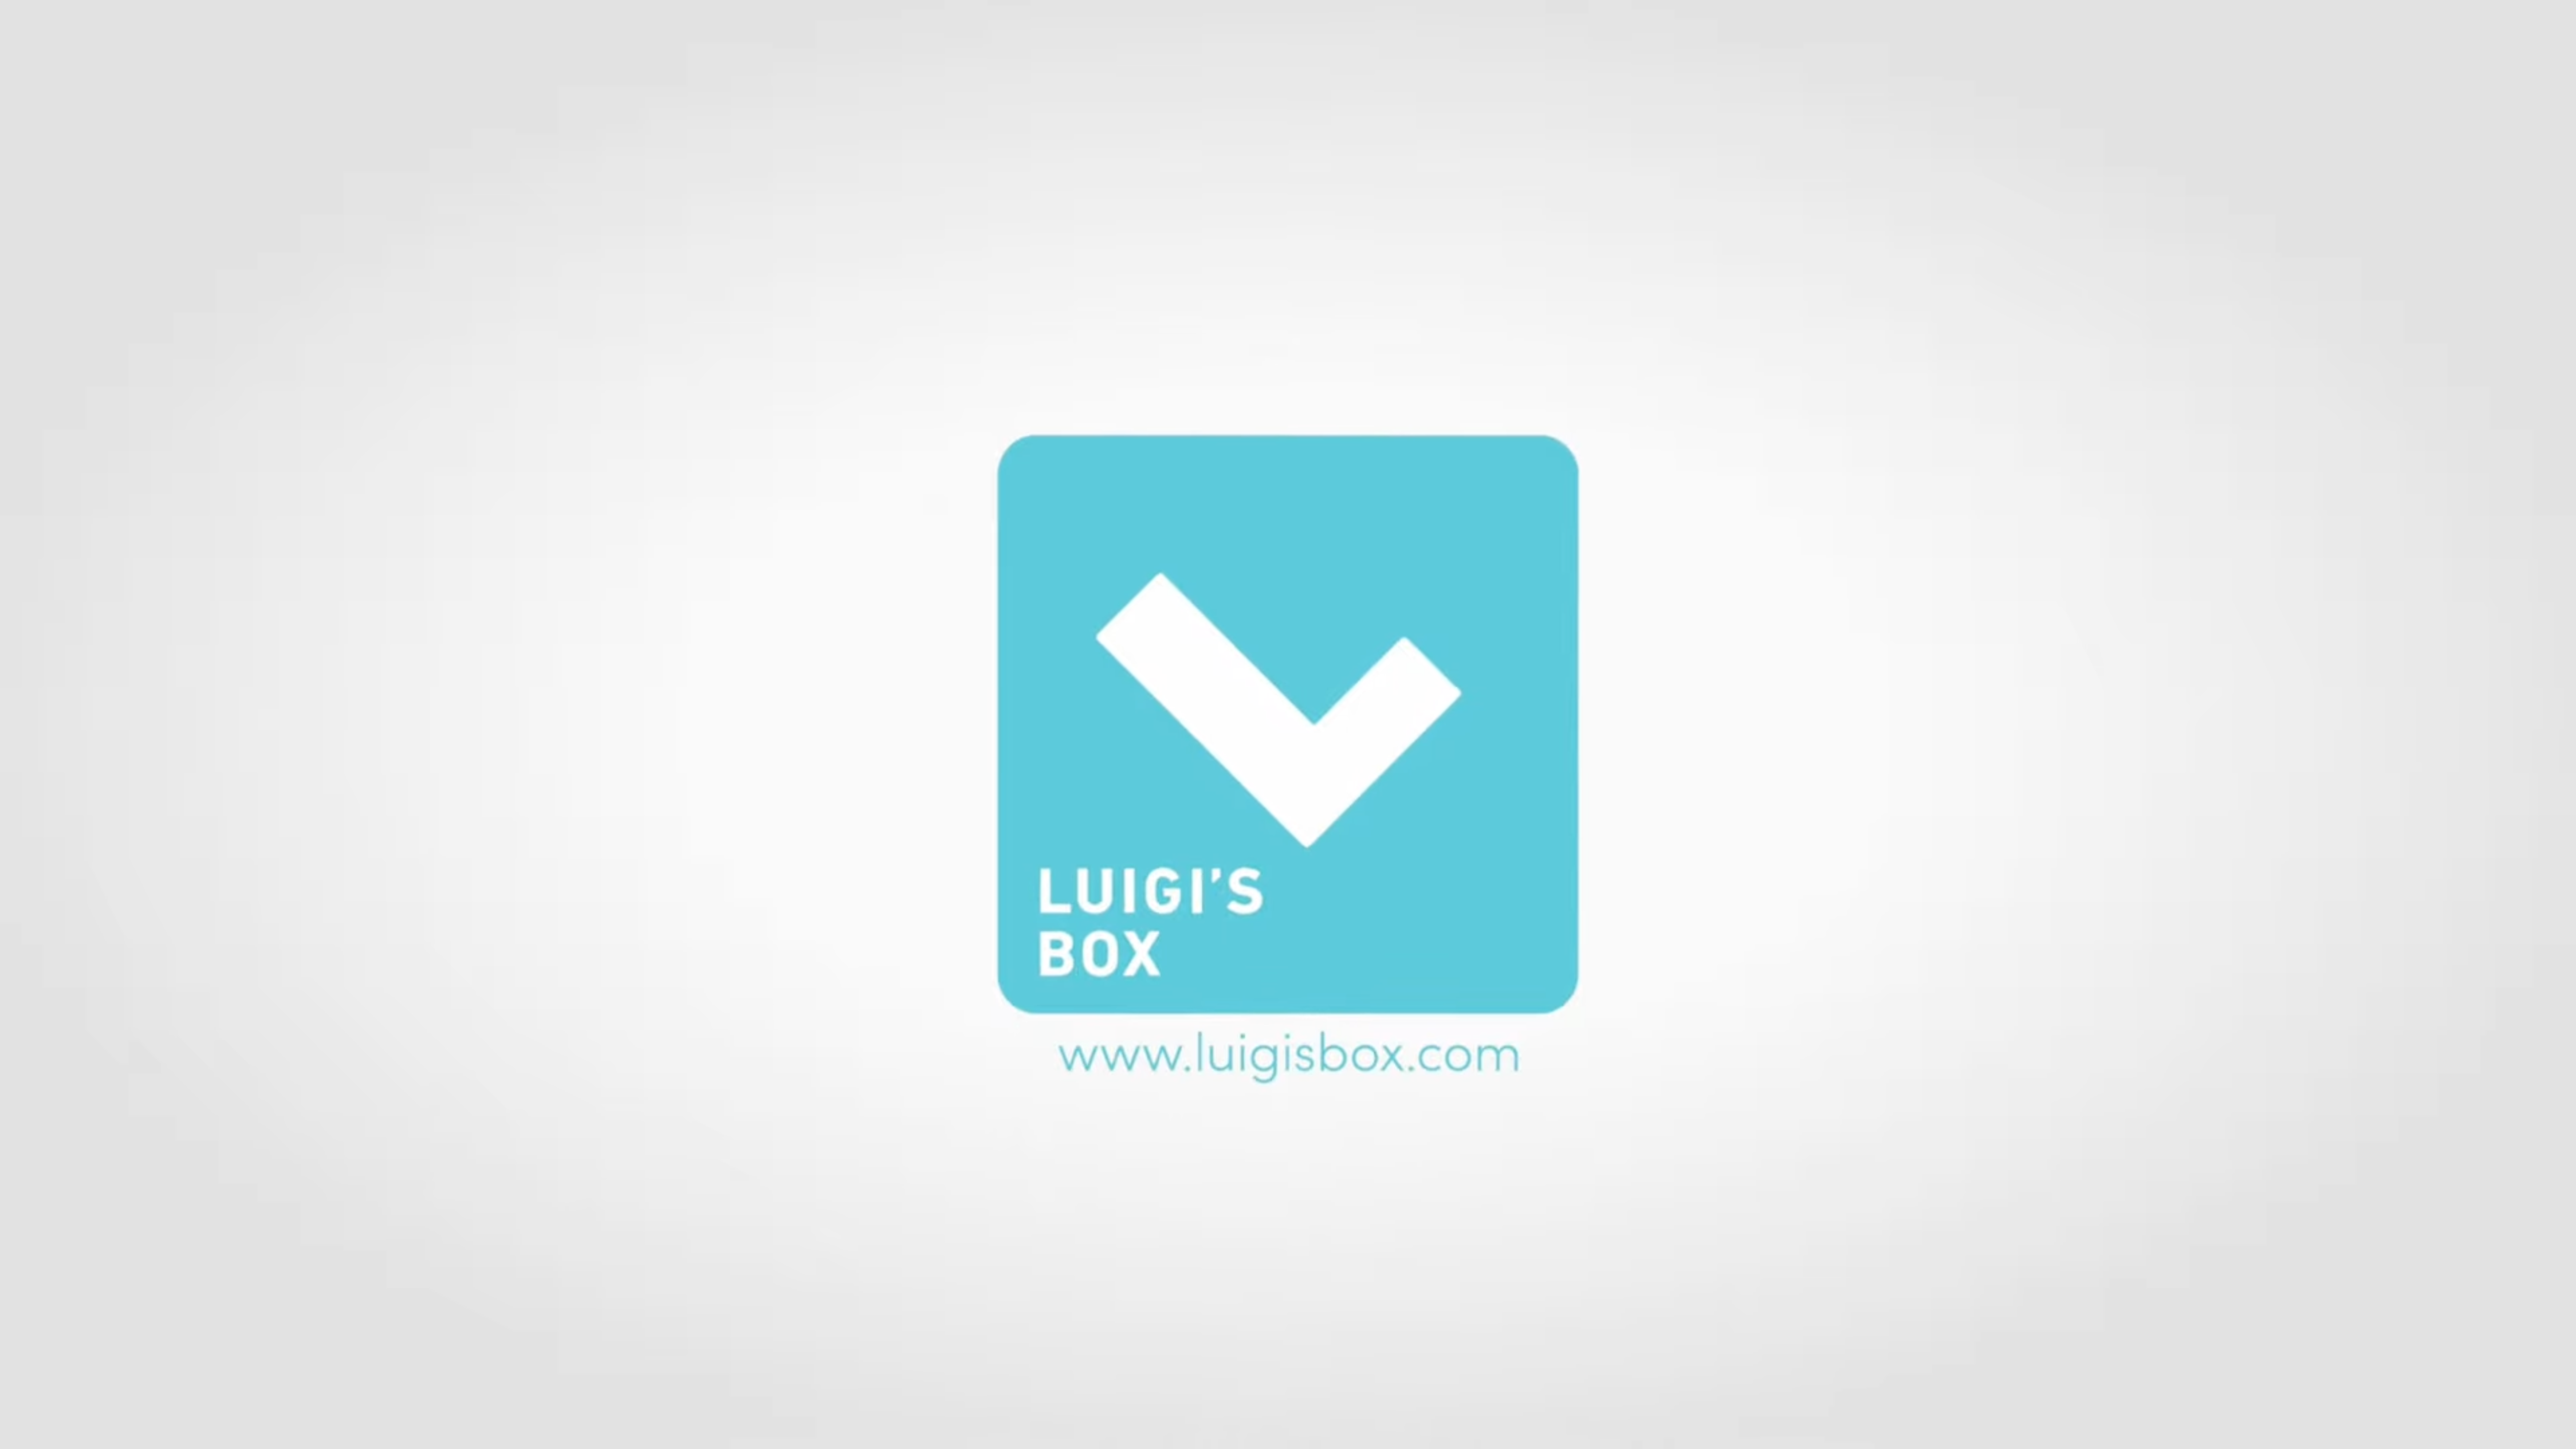 Take a quick look and see what Luigi's Box has to offer.